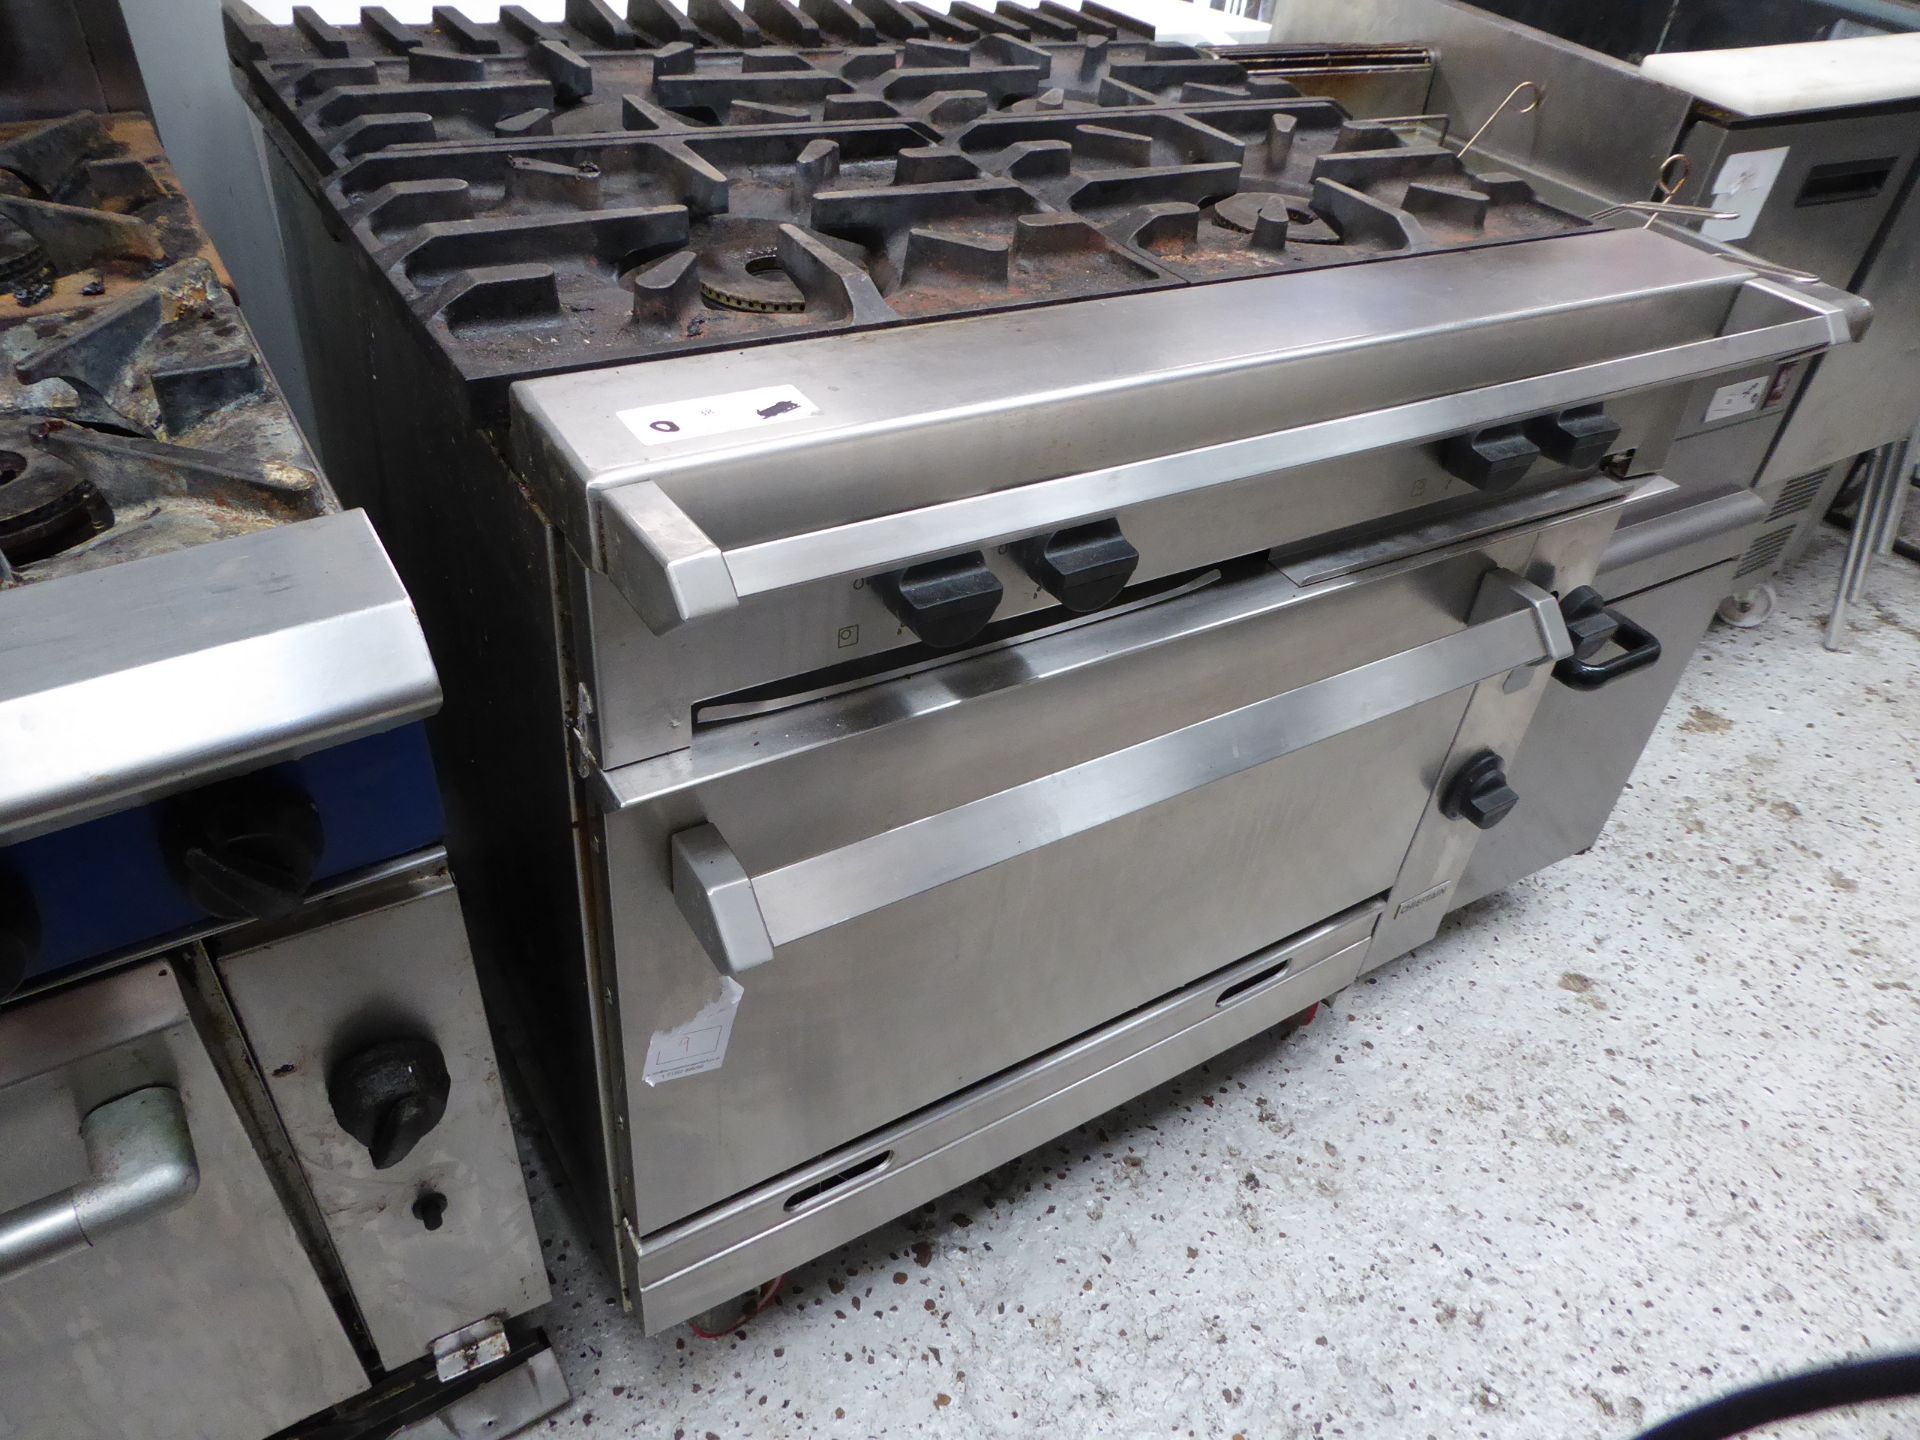 * Chieftain 4 burner single oven - mint condition from national chain. List price £5500. (